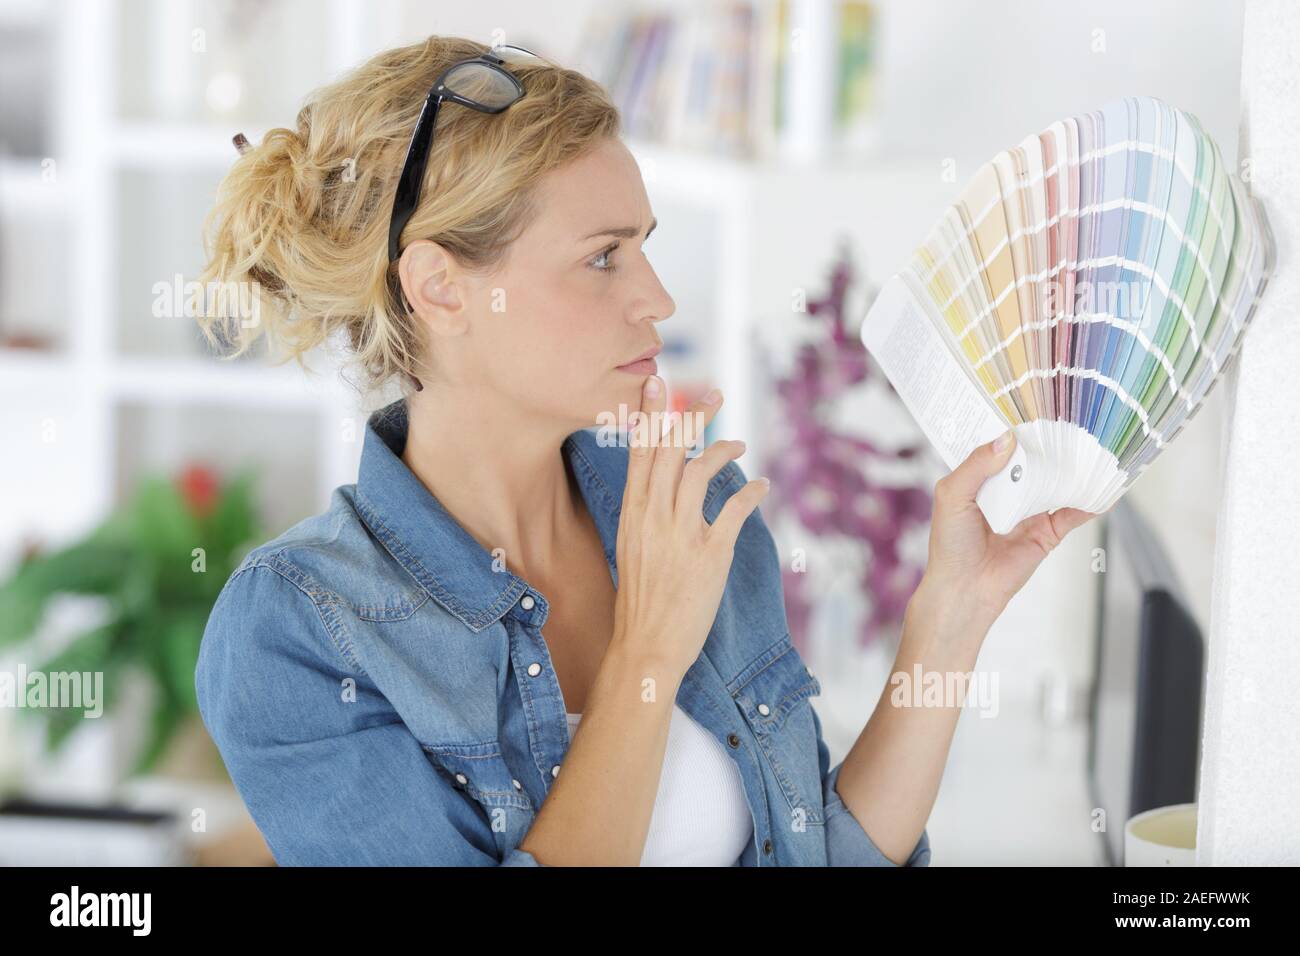 portrait of pretty blonde woman looking at color swatches Stock Photo